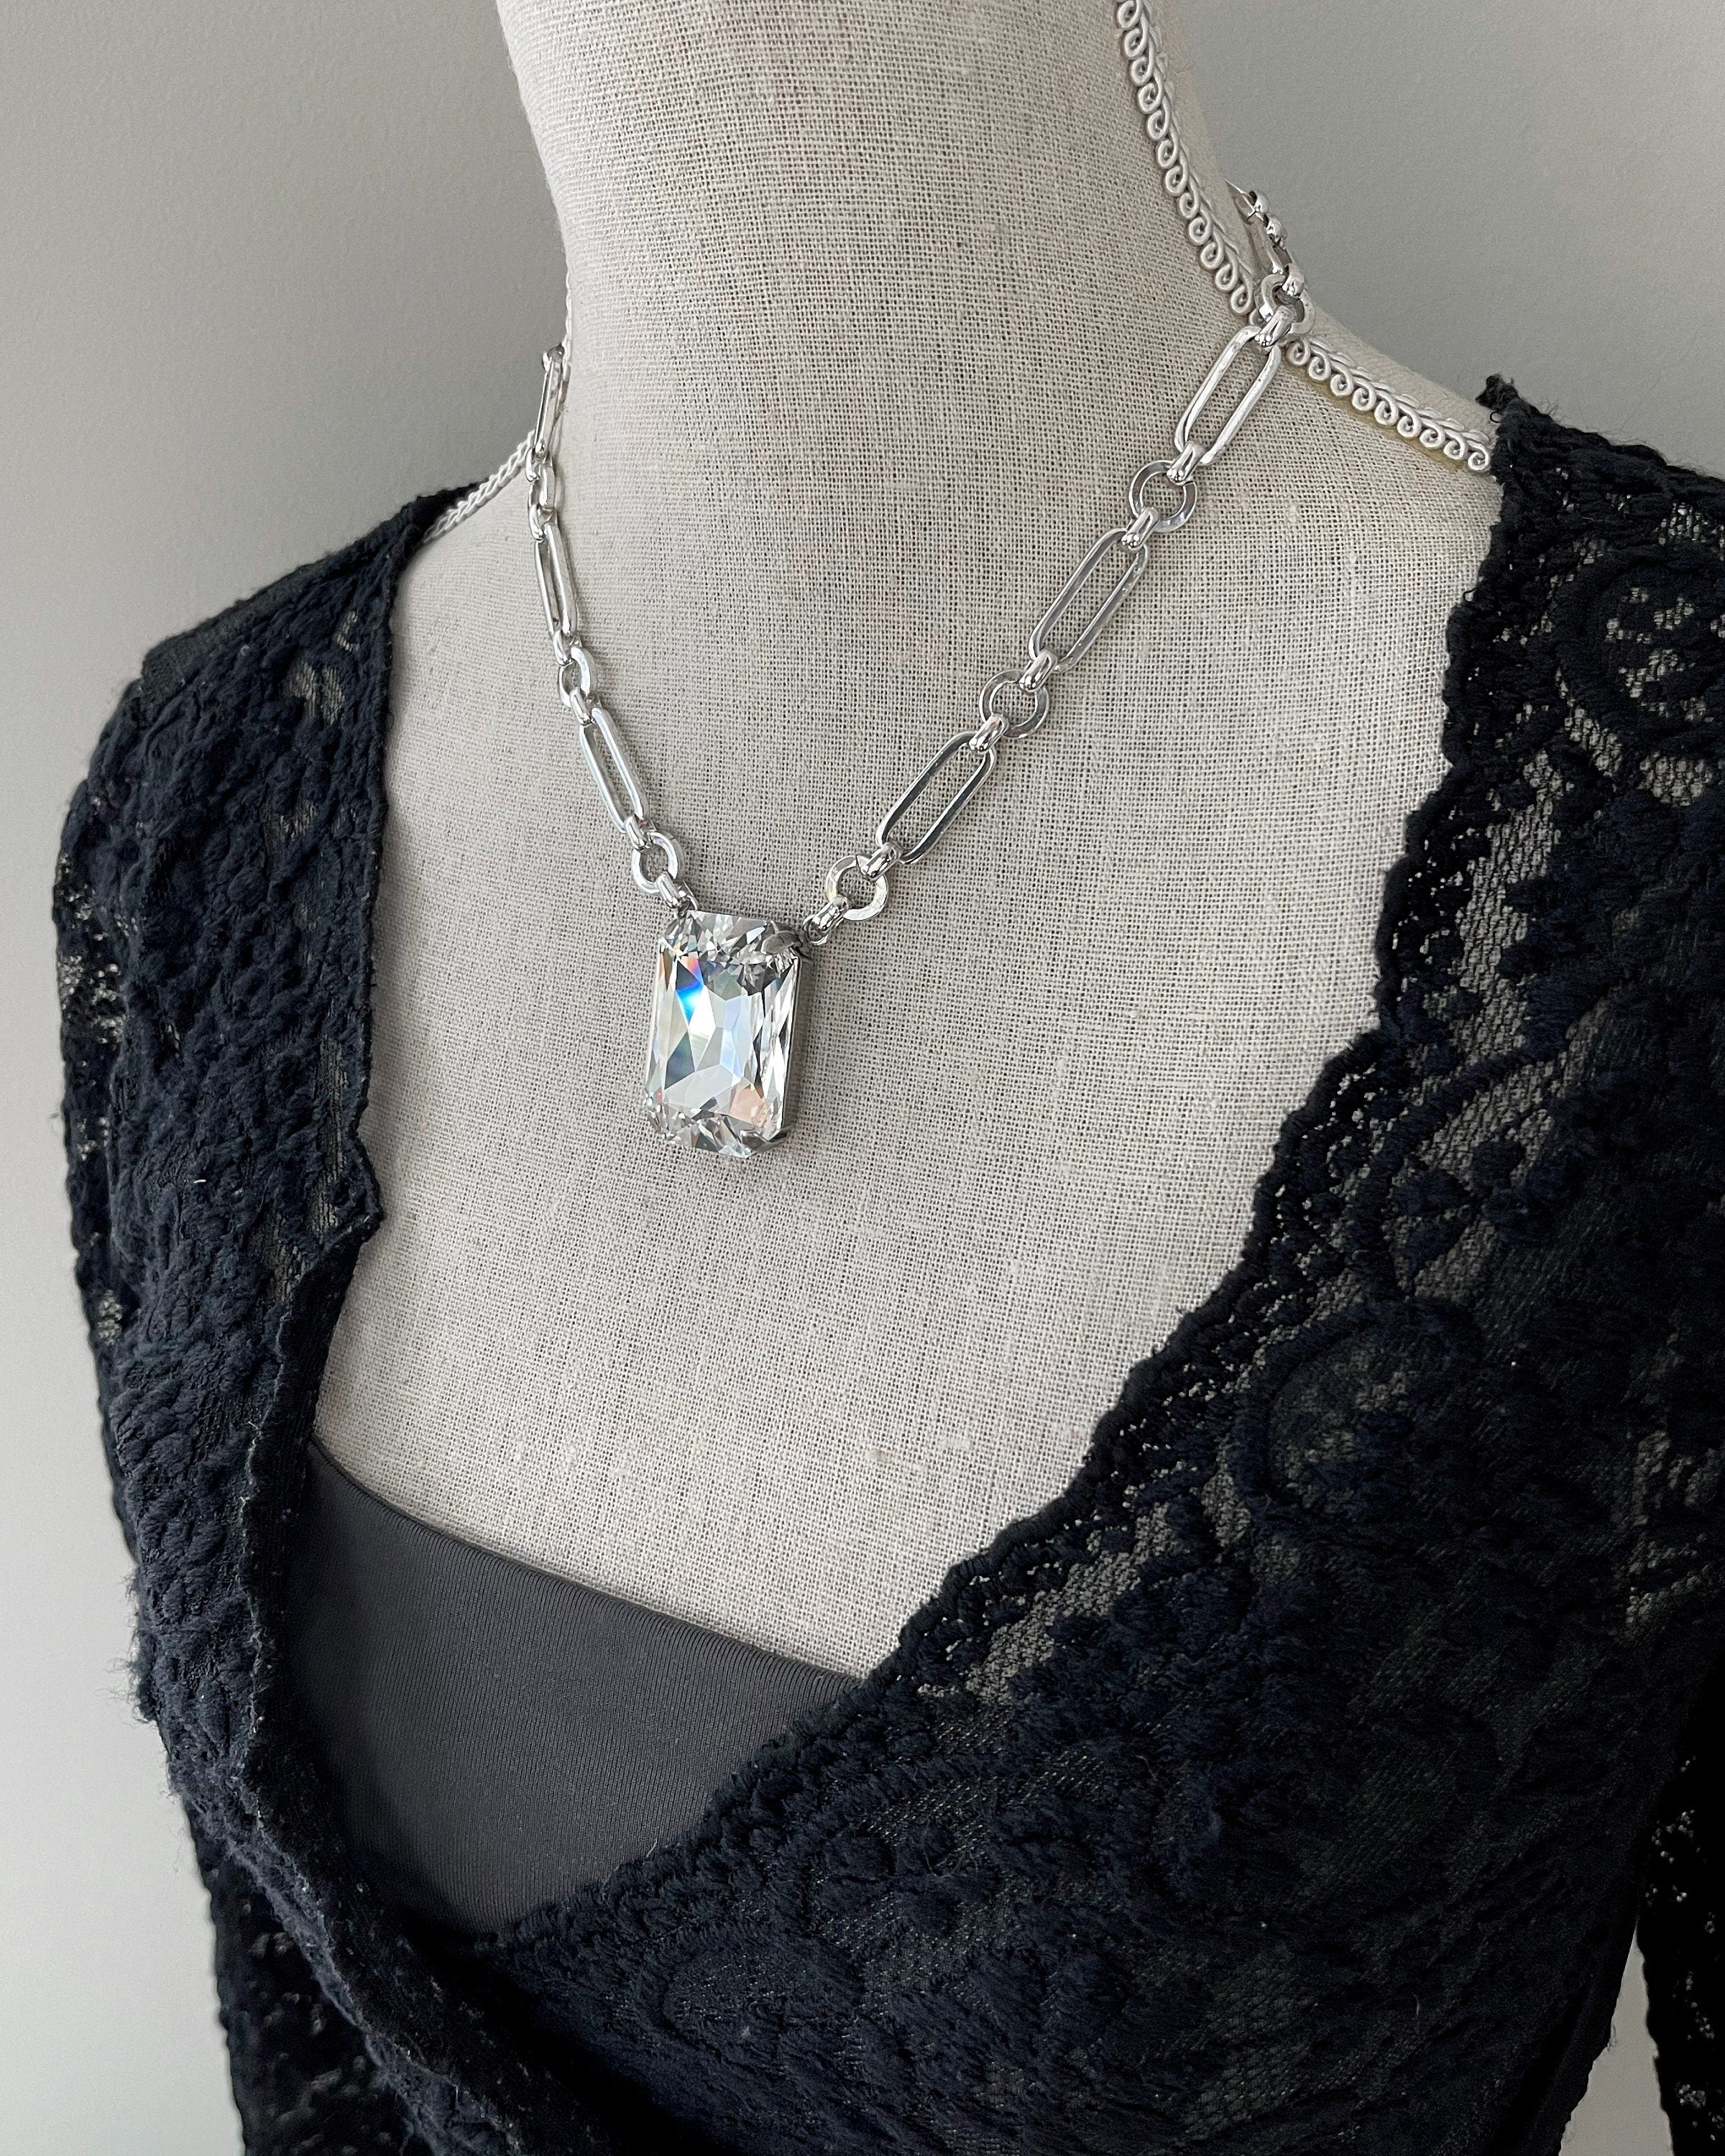 CLAIRVOYANT - Dazzling Clear Crystal Pendant Necklace with Brilliantly Sparkly Rectangle Crystal - Drag Queen Ring, Burlesque Showgirl Ring